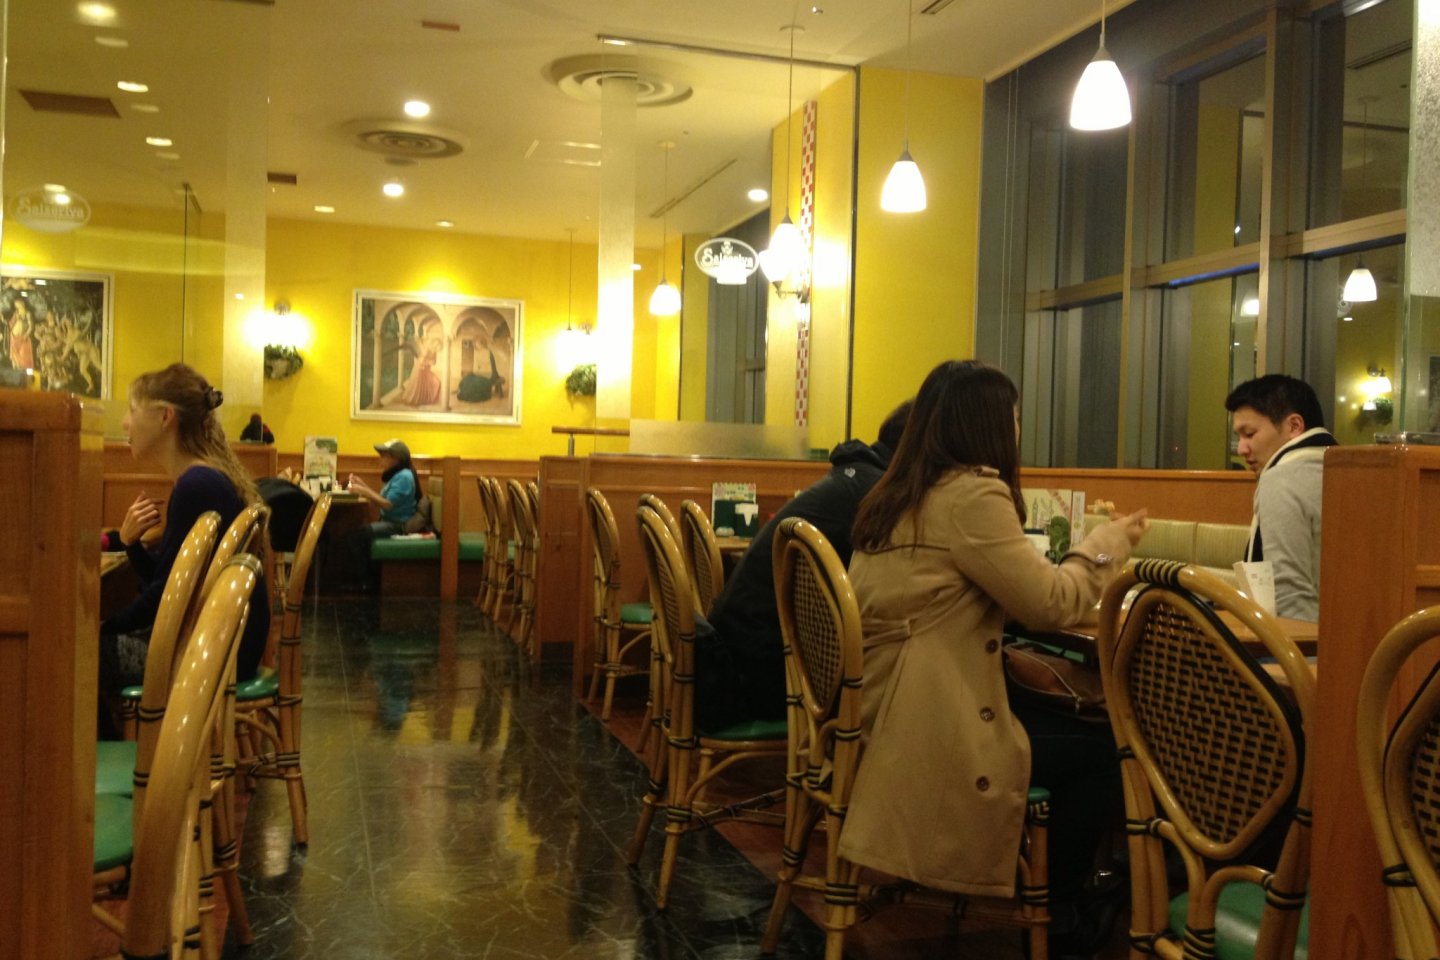 The relatively big-sized restaurant gives room for everybody to dine-in.